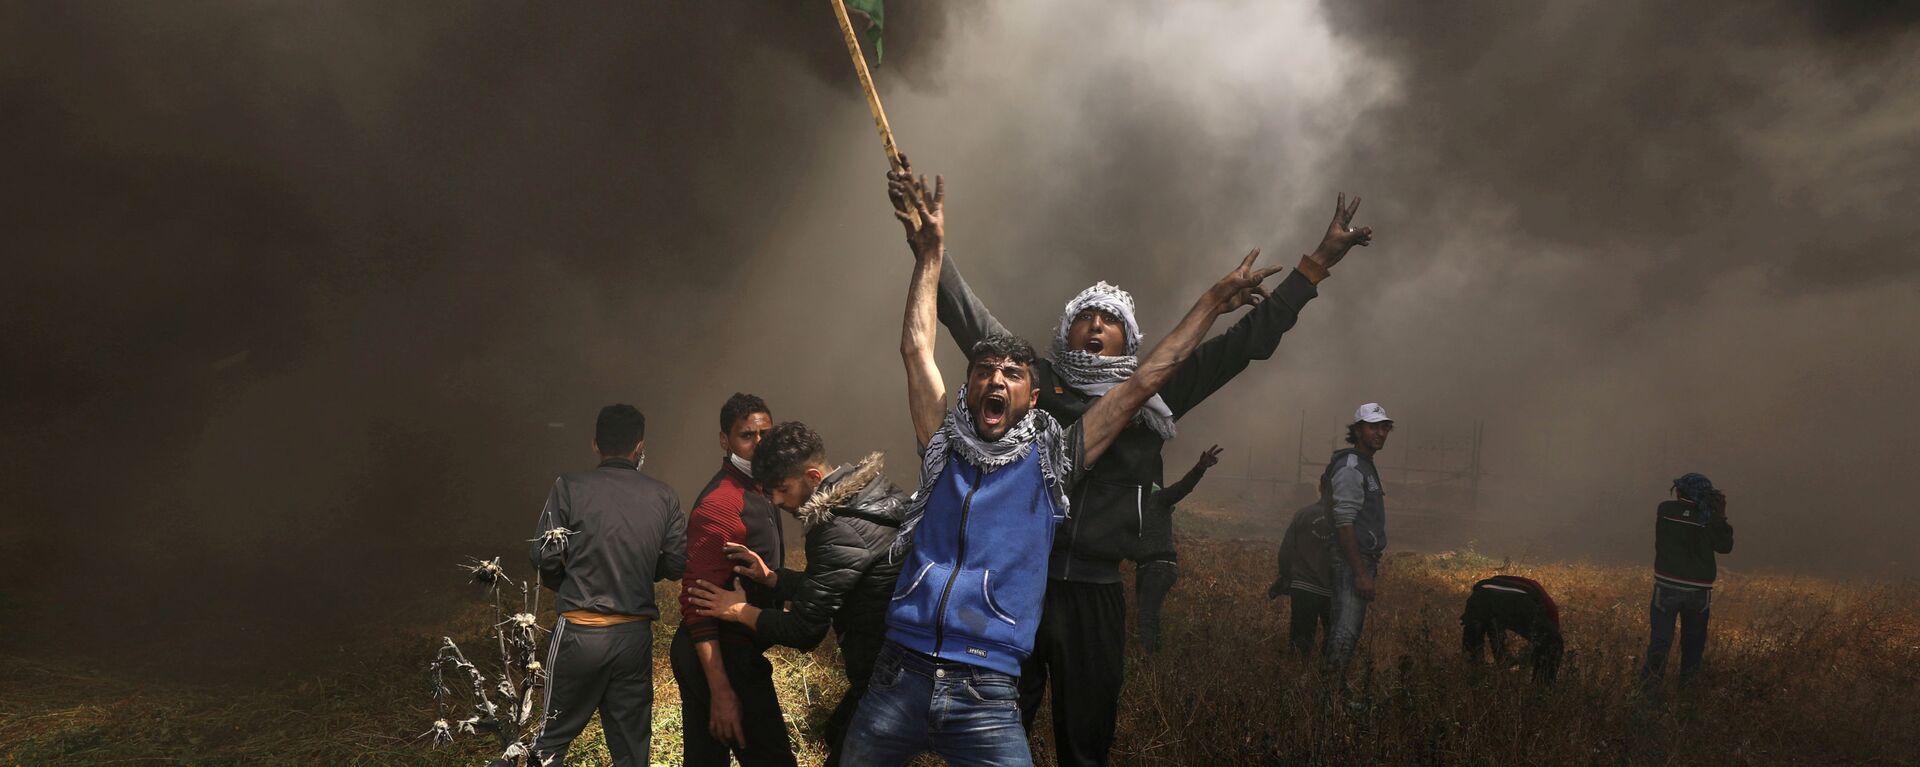 Palestinian demonstrators shout during clashes with Israeli troops at a protest demanding the right to return to their homeland, at the Israel-Gaza border east of Gaza City April 6, 2018. - Sputnik International, 1920, 29.12.2019